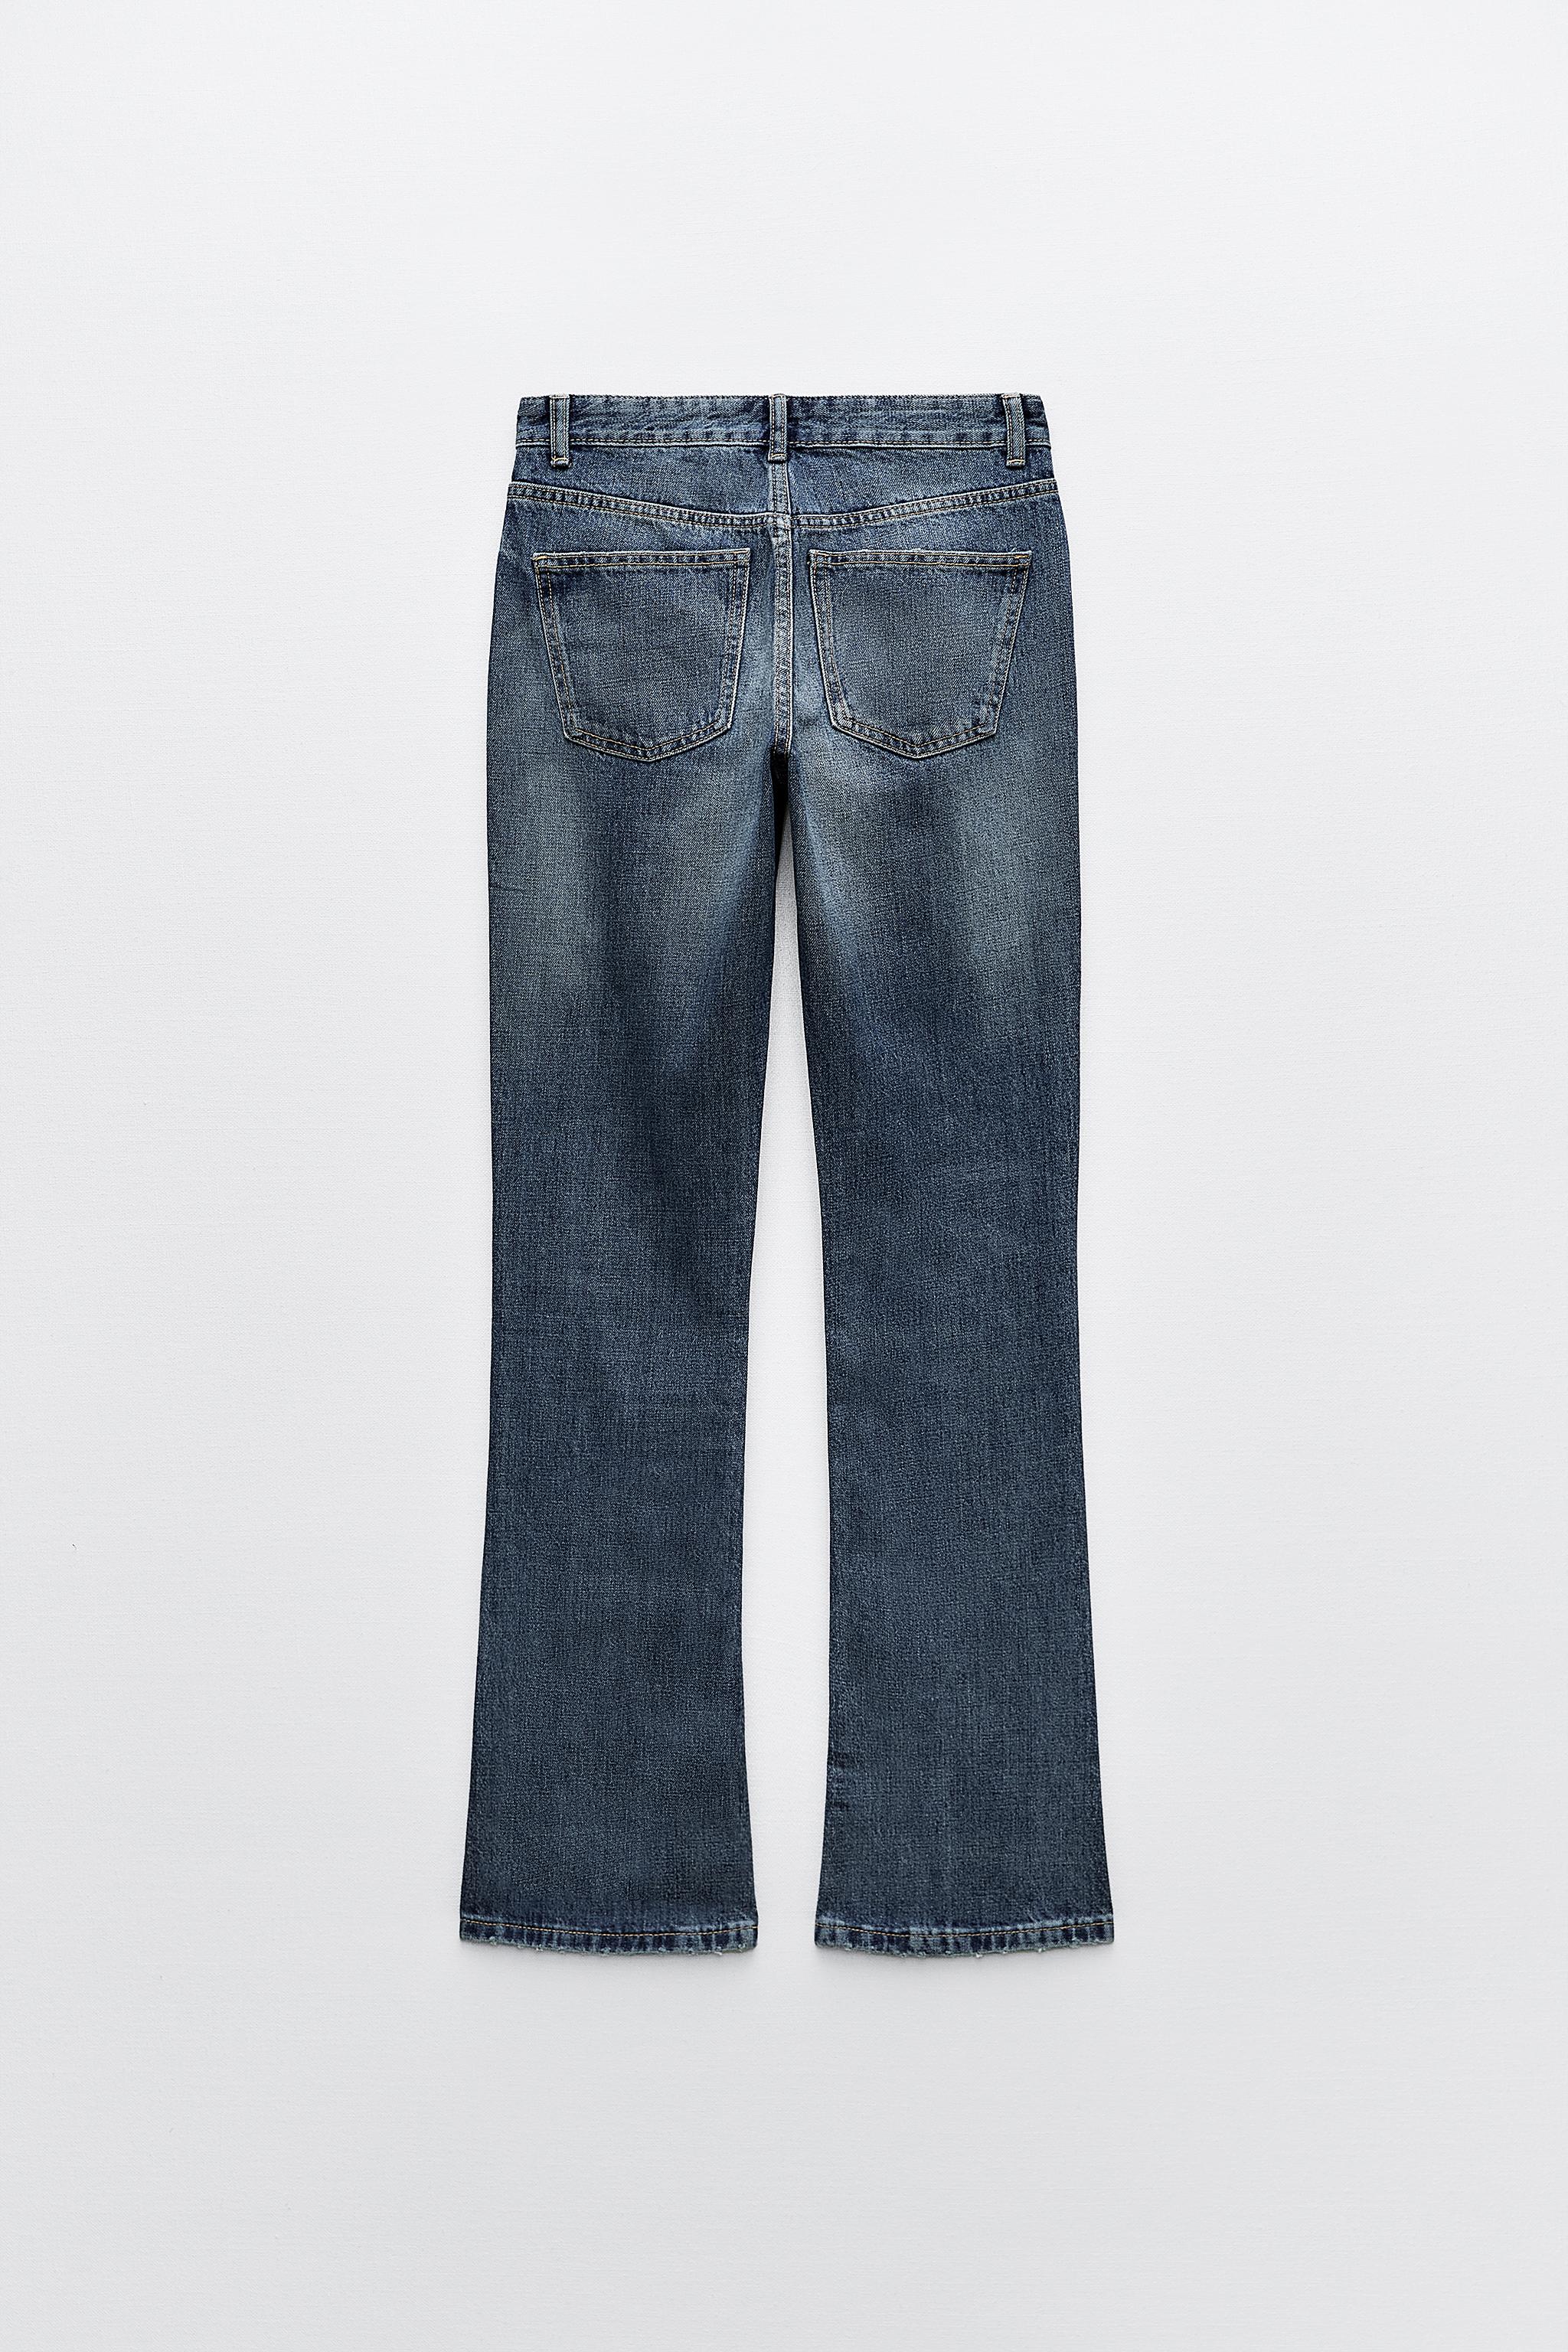 MID-RISE BOOTCUT ZW JEANS - Blue, ZARA United States